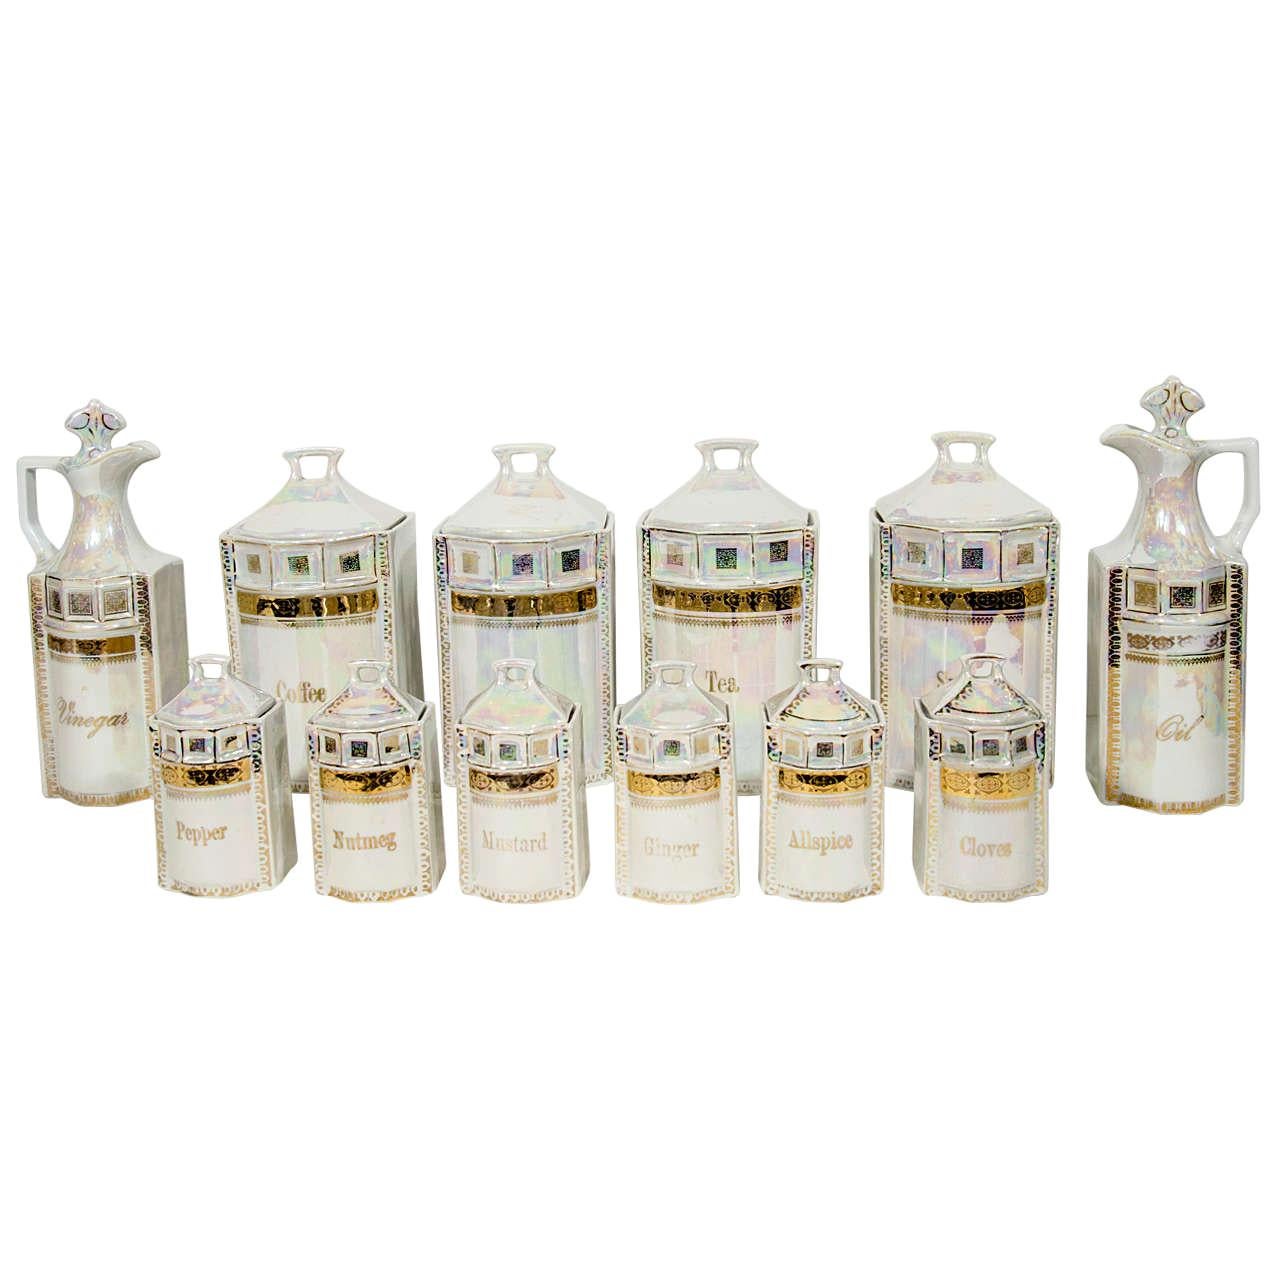 Antique Porcelain Canister Storage Jars and Spice Set 12 Pc., Germany circa 1900 For Sale